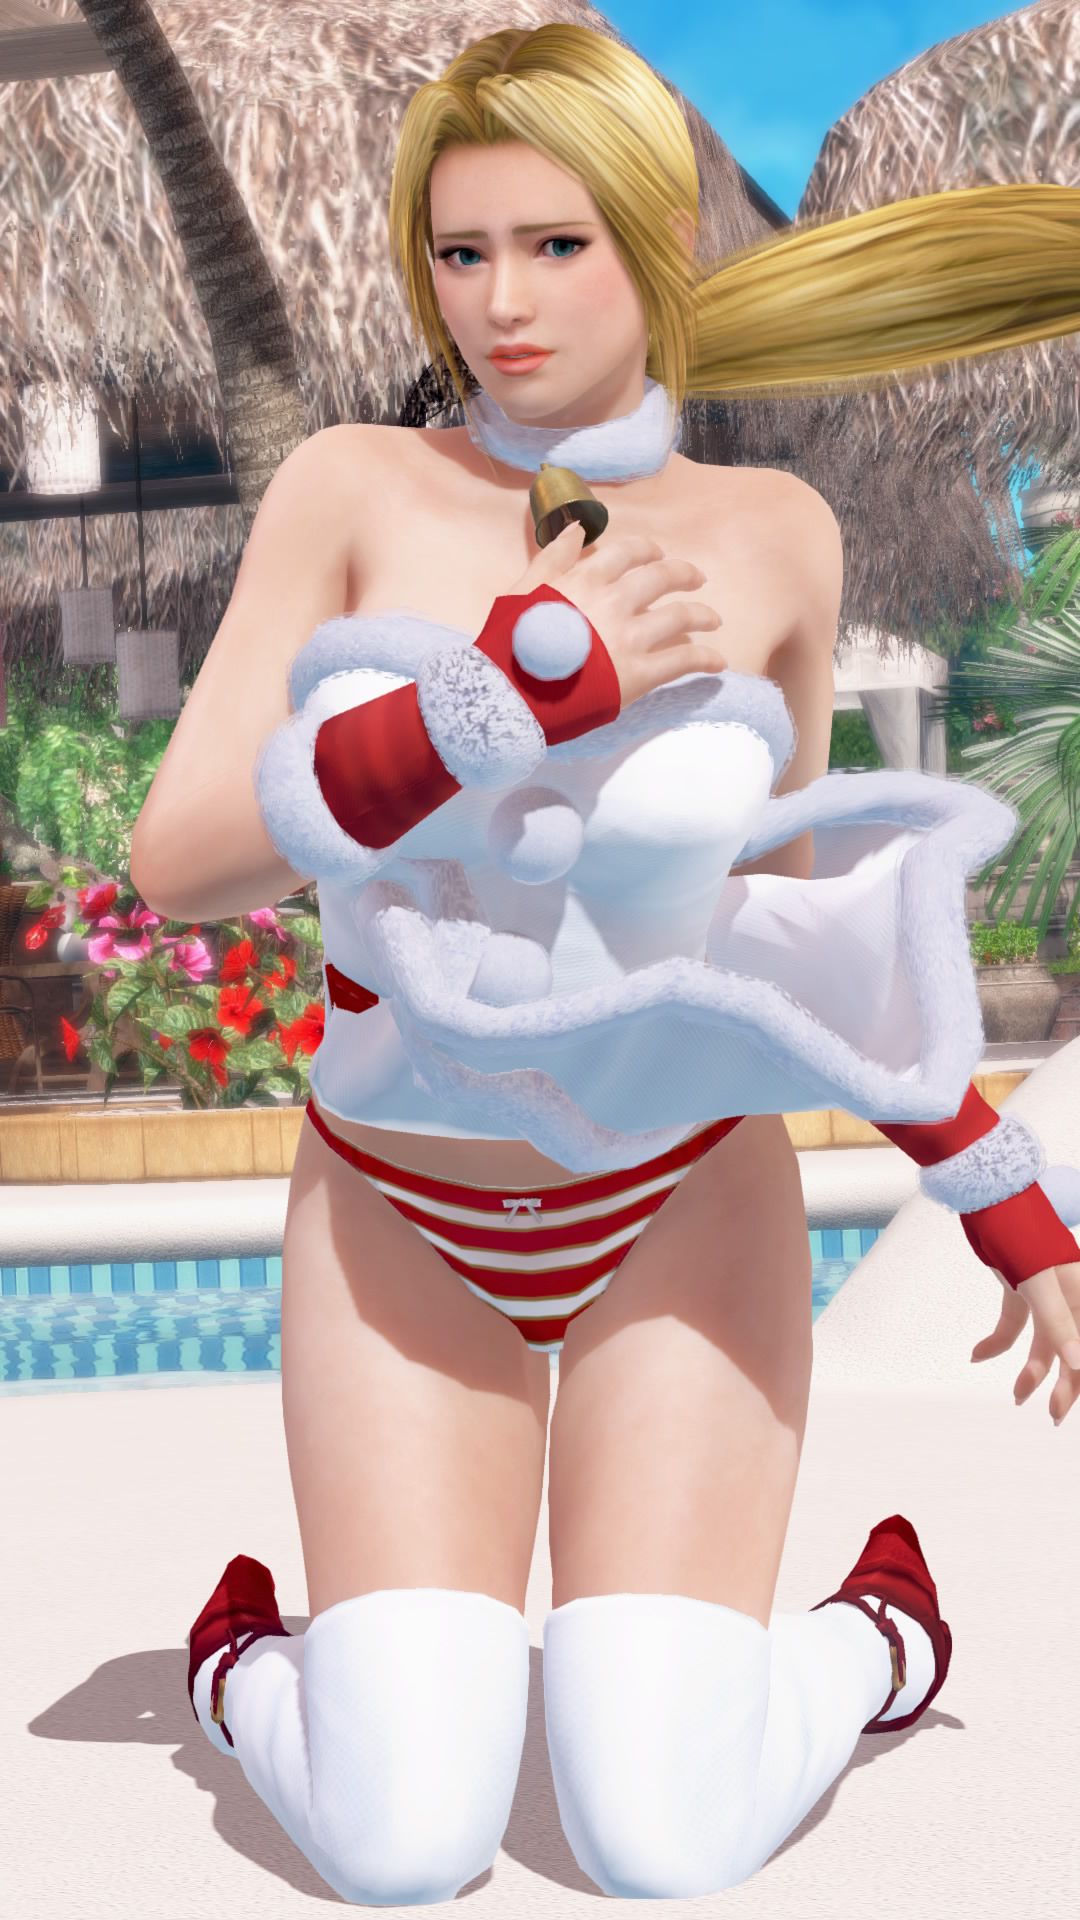 Merry Xmas from DOAX3 South Island! Photo session with new swimsuit Santa 24